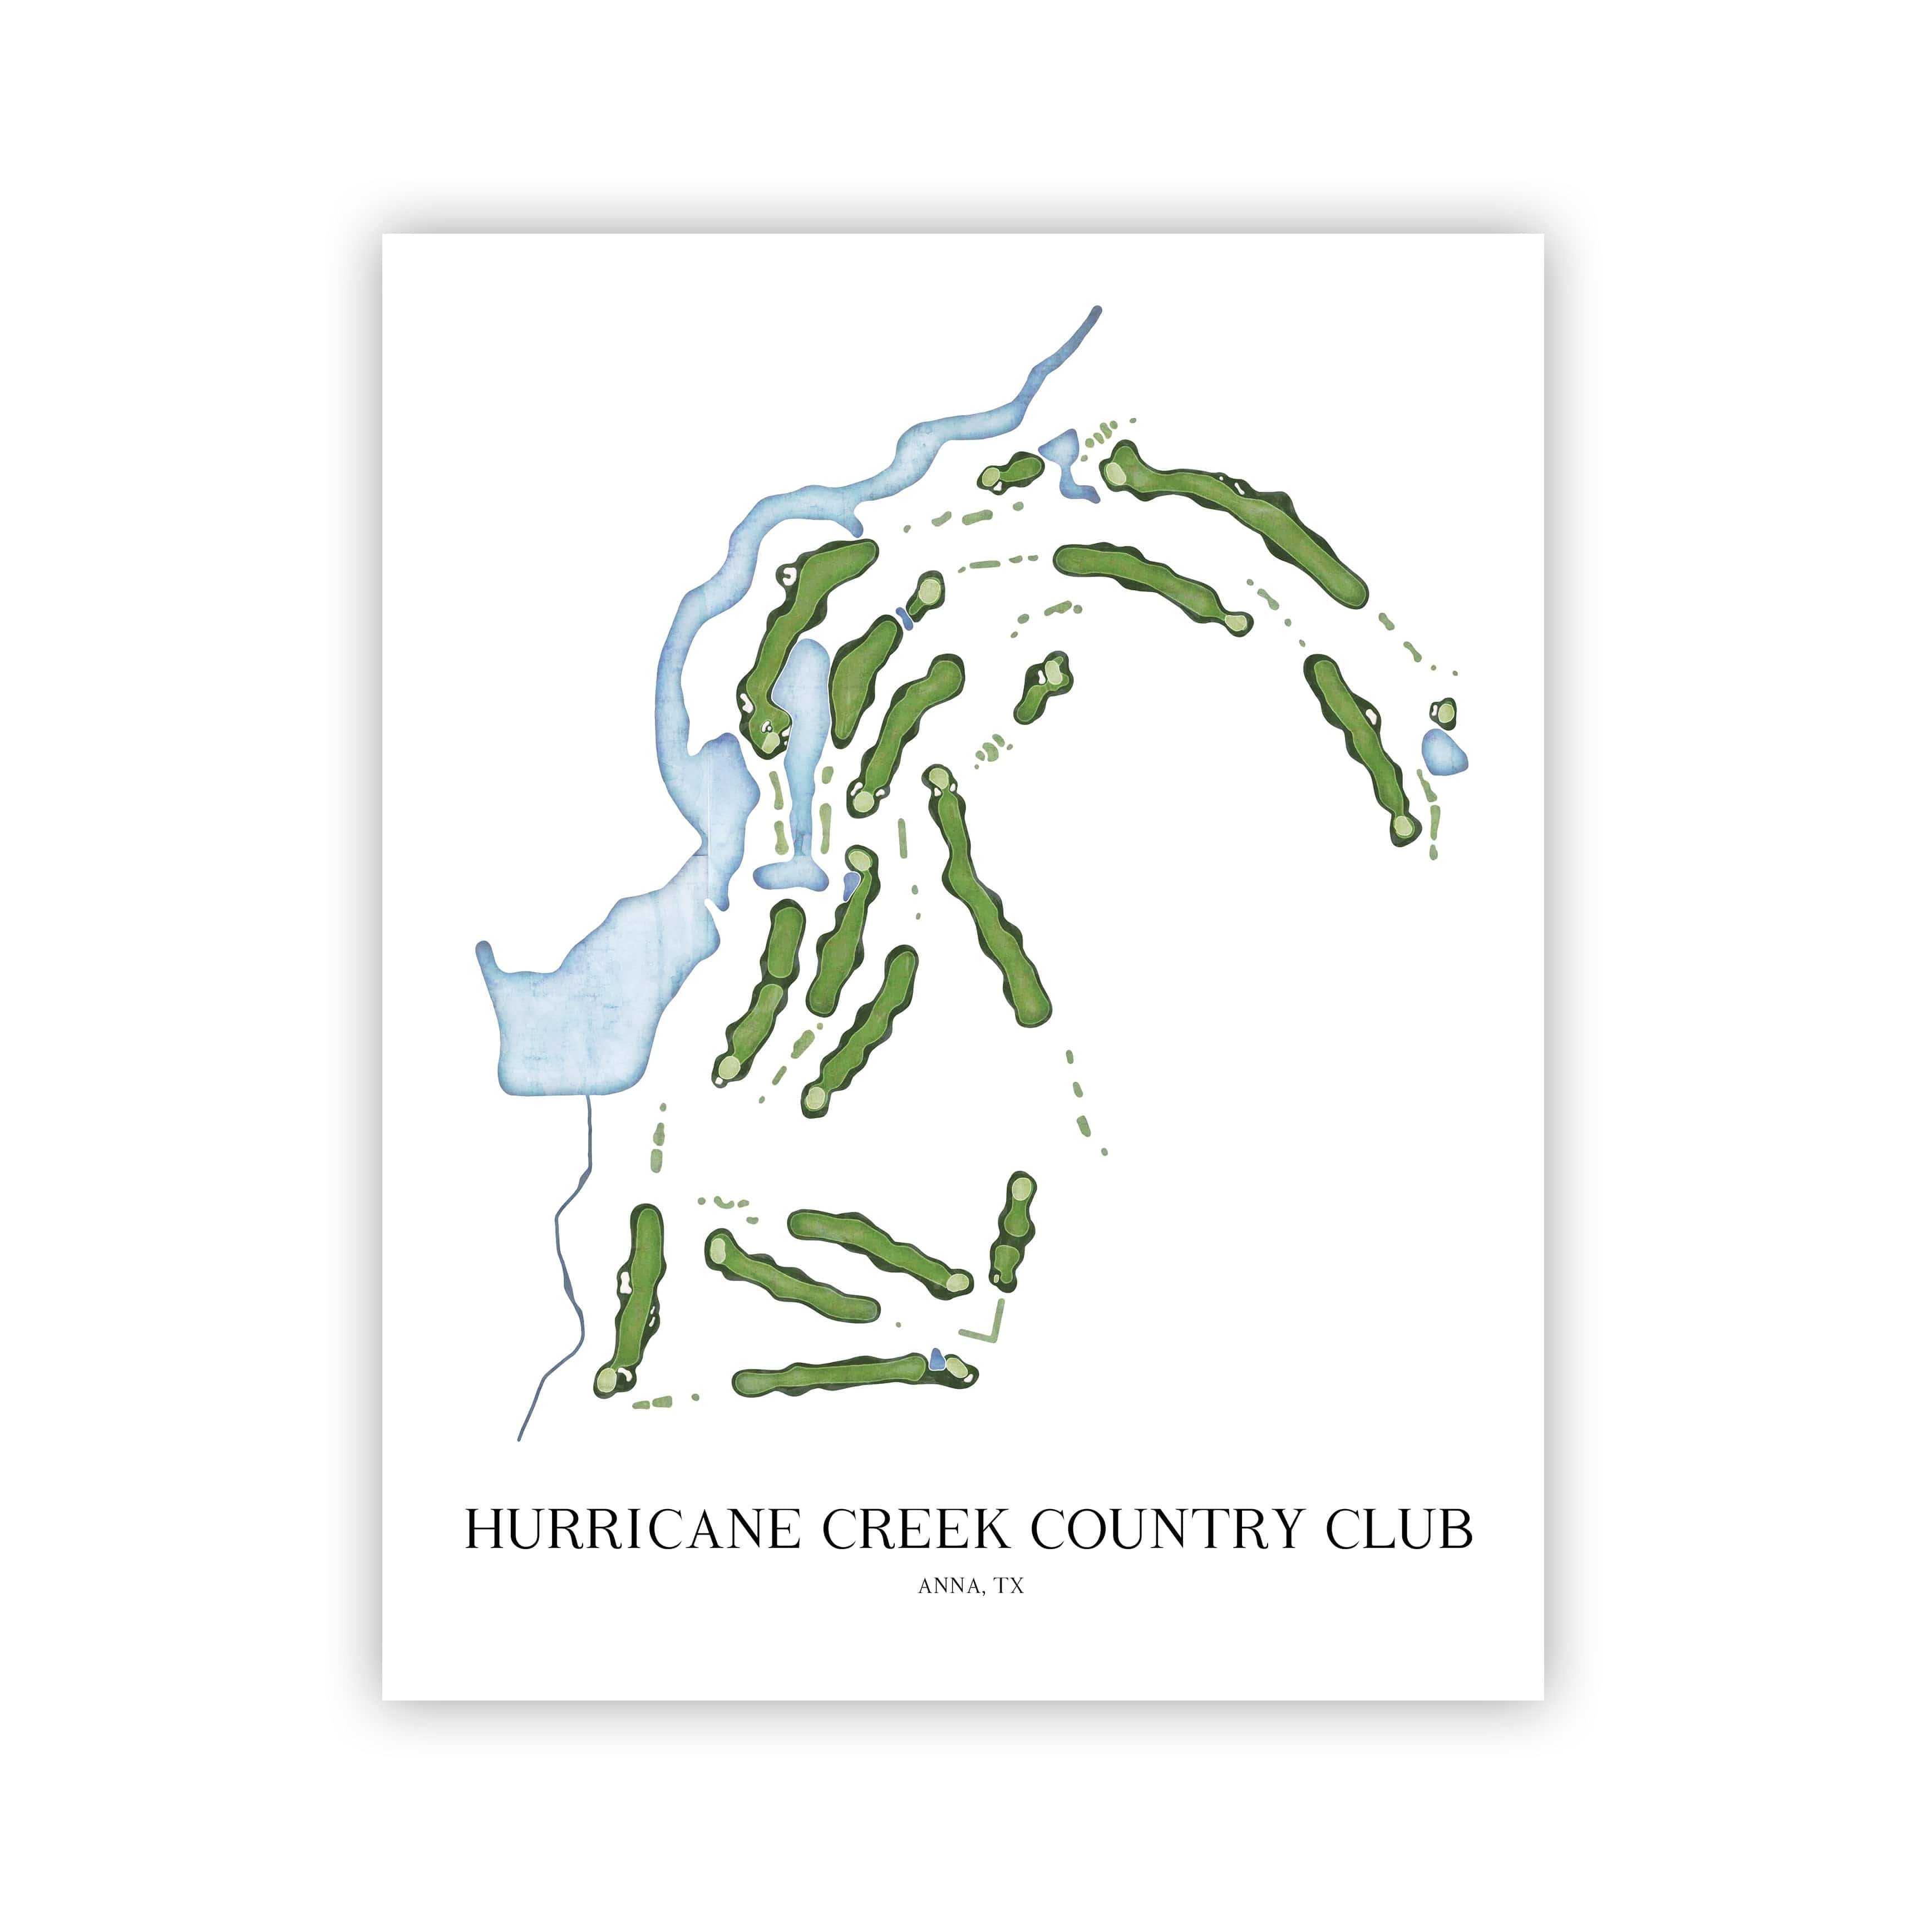 The 19th Hole Golf Shop - Golf Course Prints -  Hurricane Creek Country Club Golf Course Map